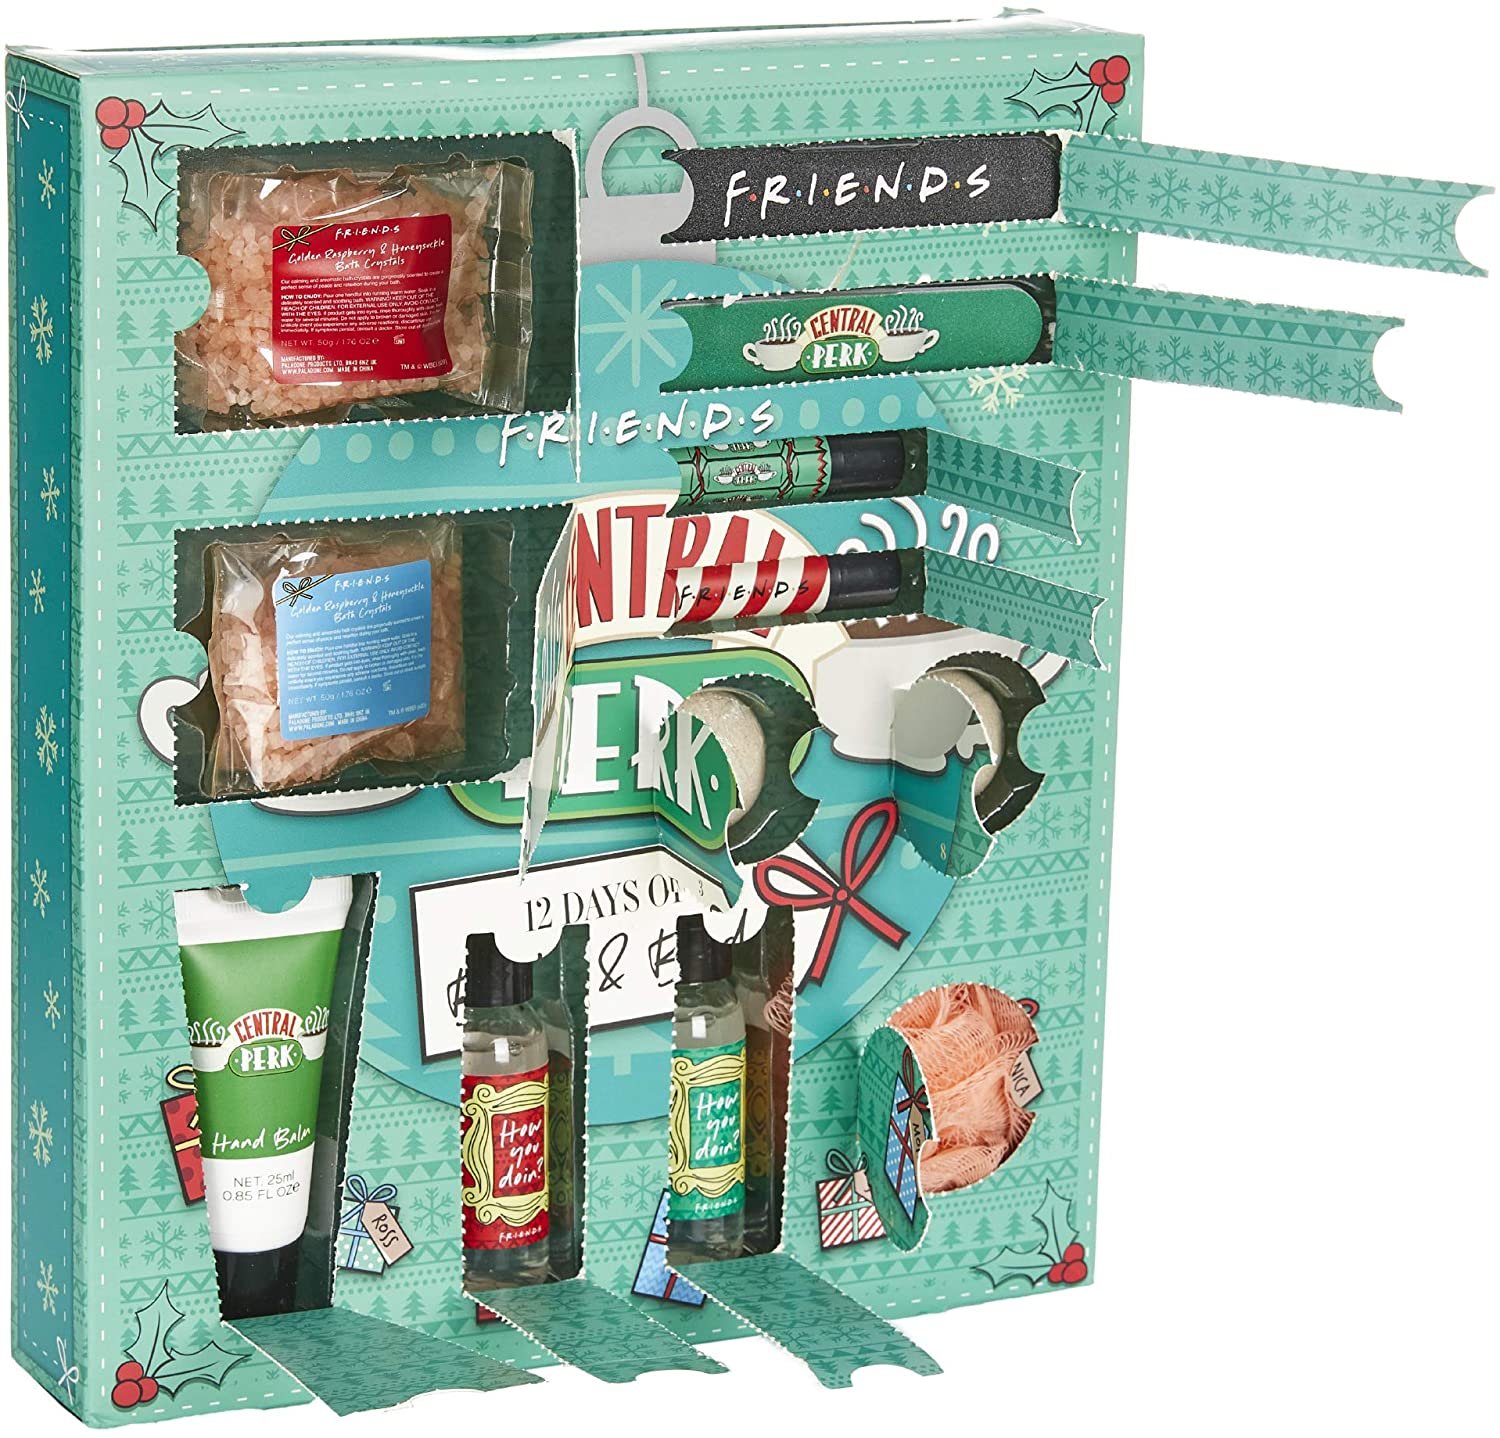 This Beauty-Stocked ‘Friends’ Advent Calendar Is the Perfect Last-Minute Gift Idea